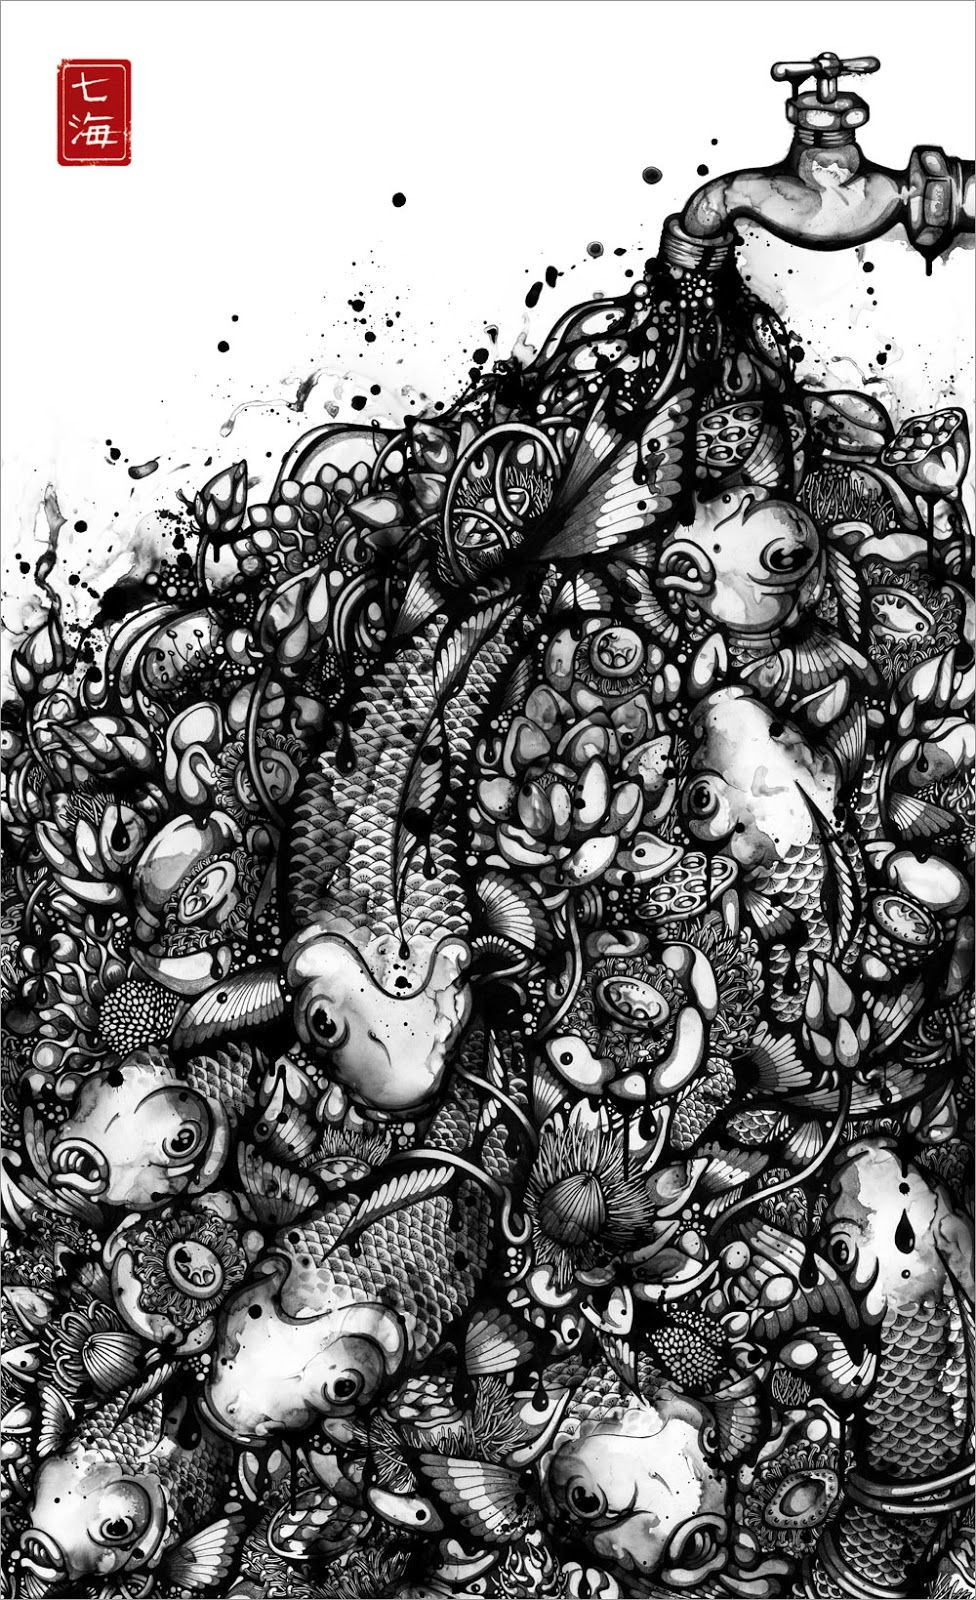 10-Over-Flow-Nanami-Cowdroy-Splashes-of-Ink-Drawings-www-designstack-co